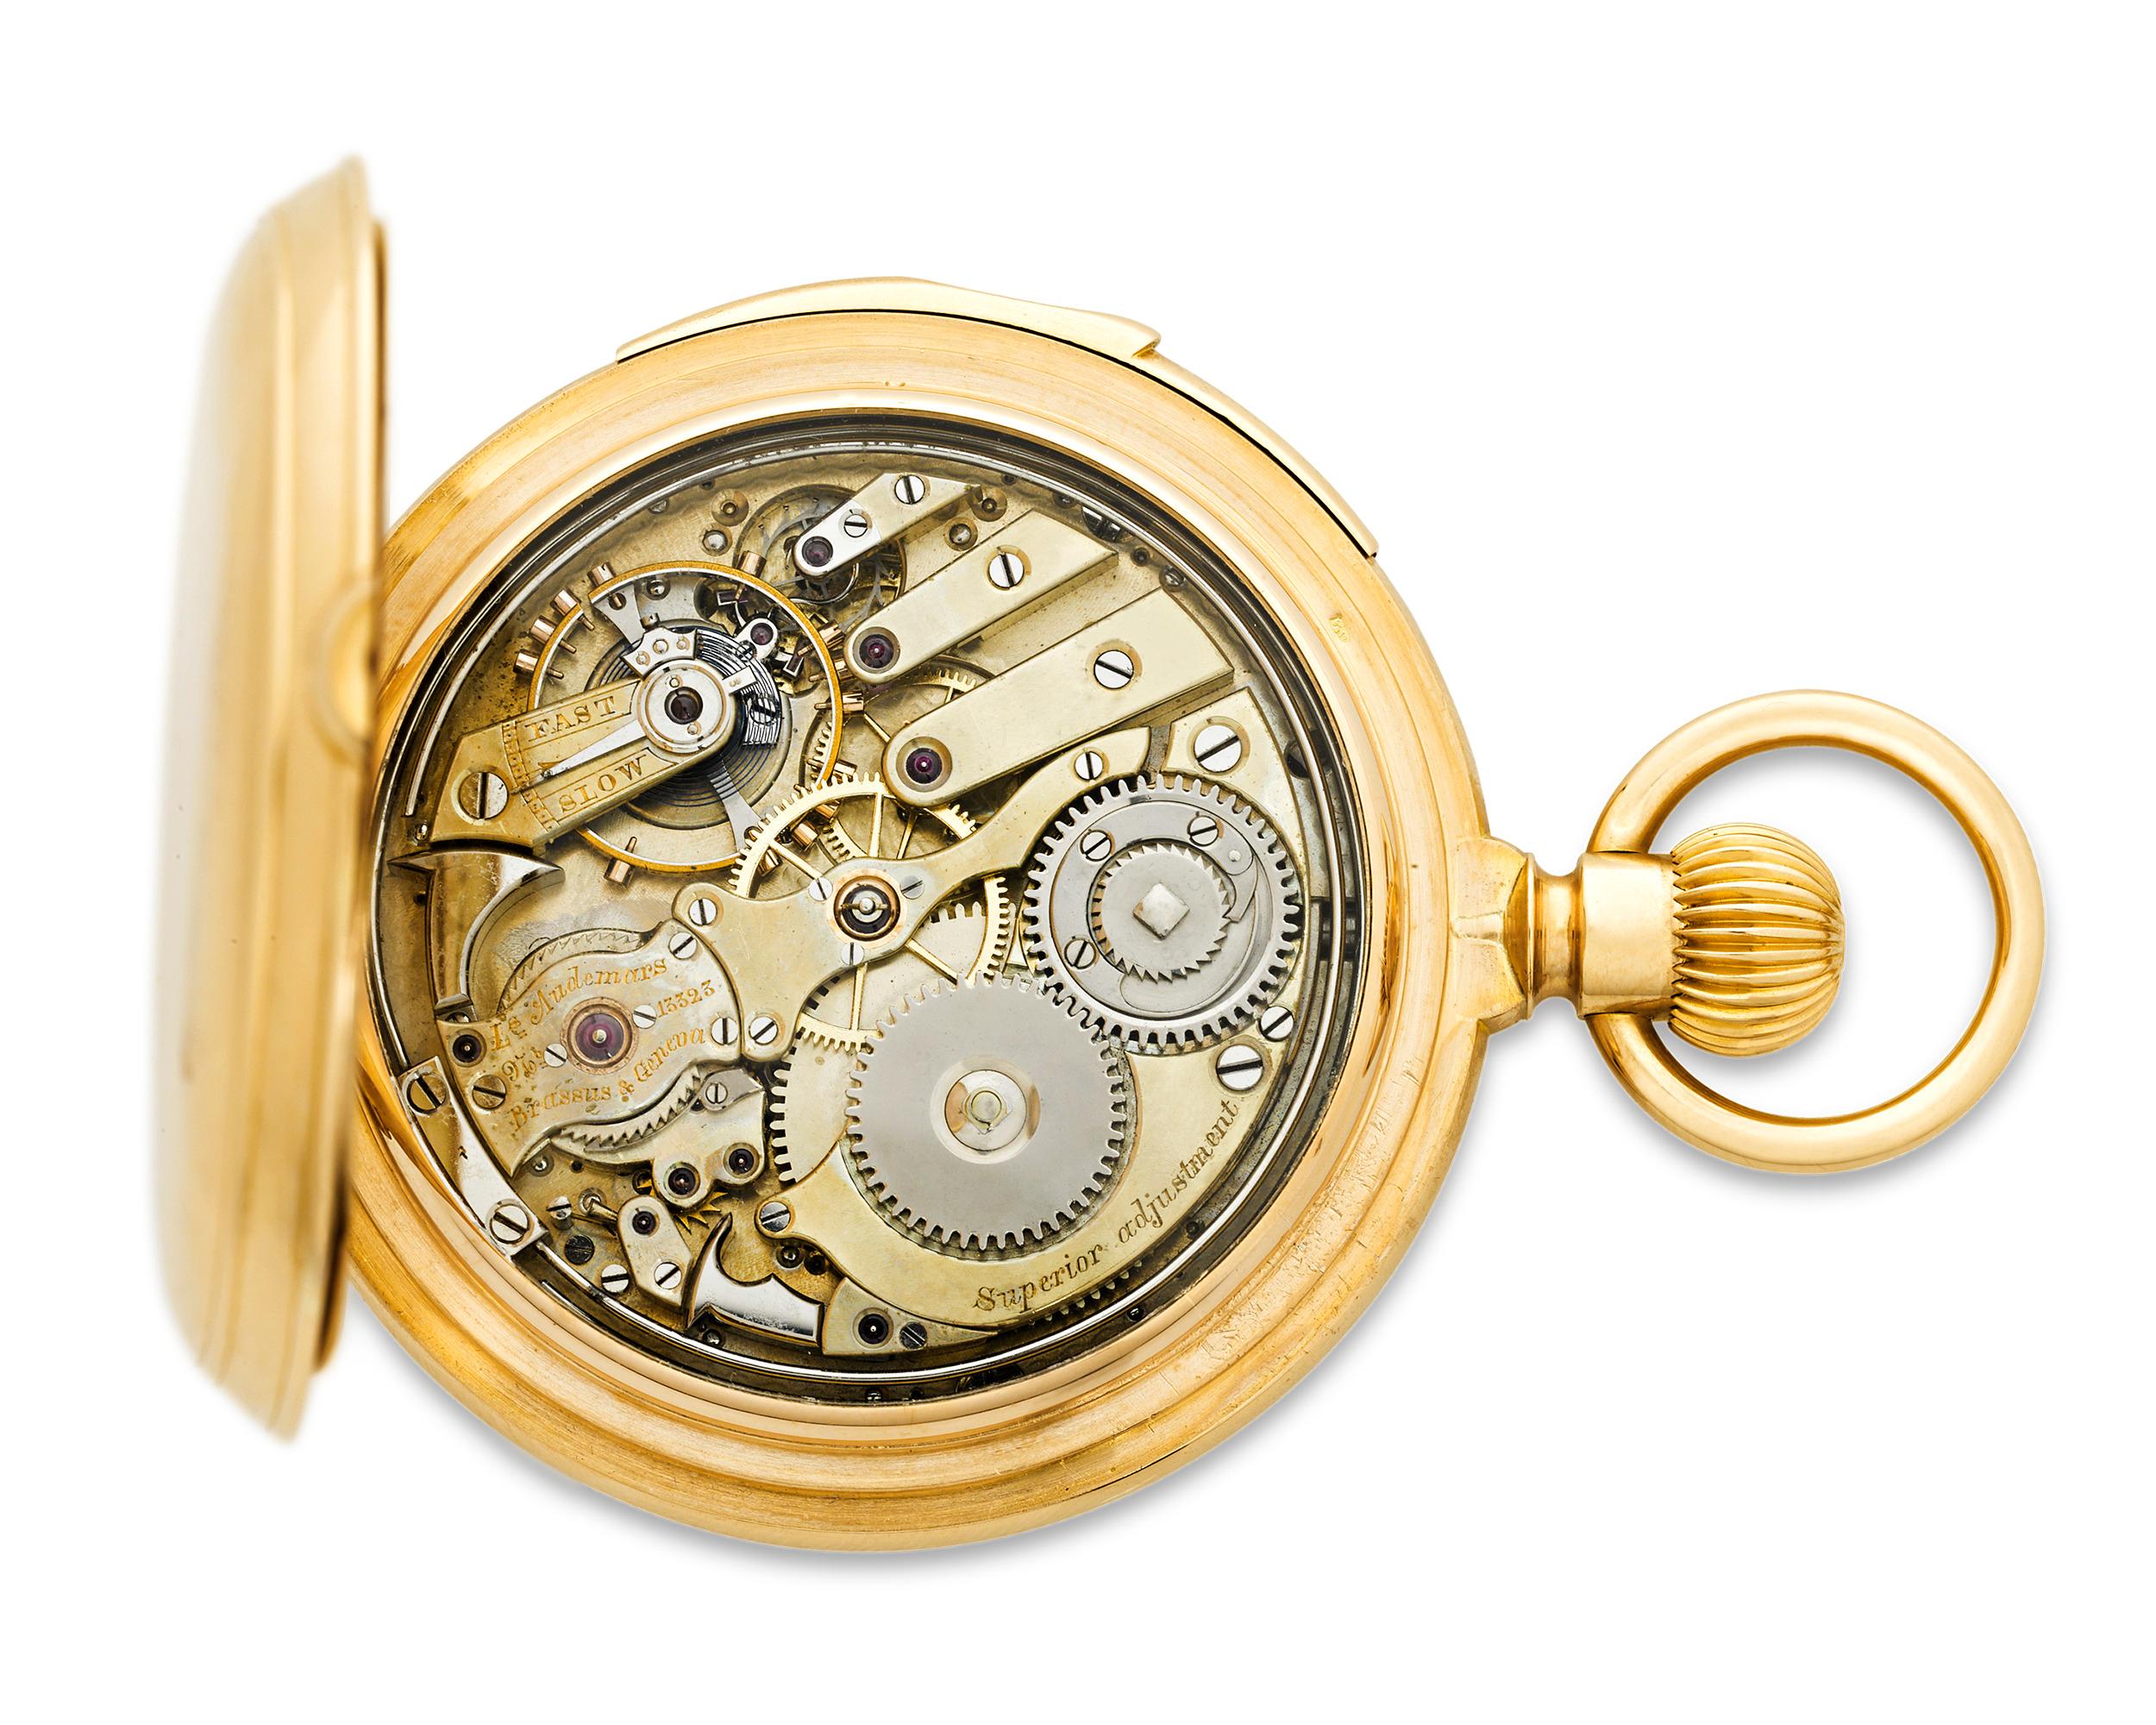 This handsome 18K yellow gold pocket watch was created by Audemars Piguet of Le Brassus, Switzerland, a firm considered to be the leader in 